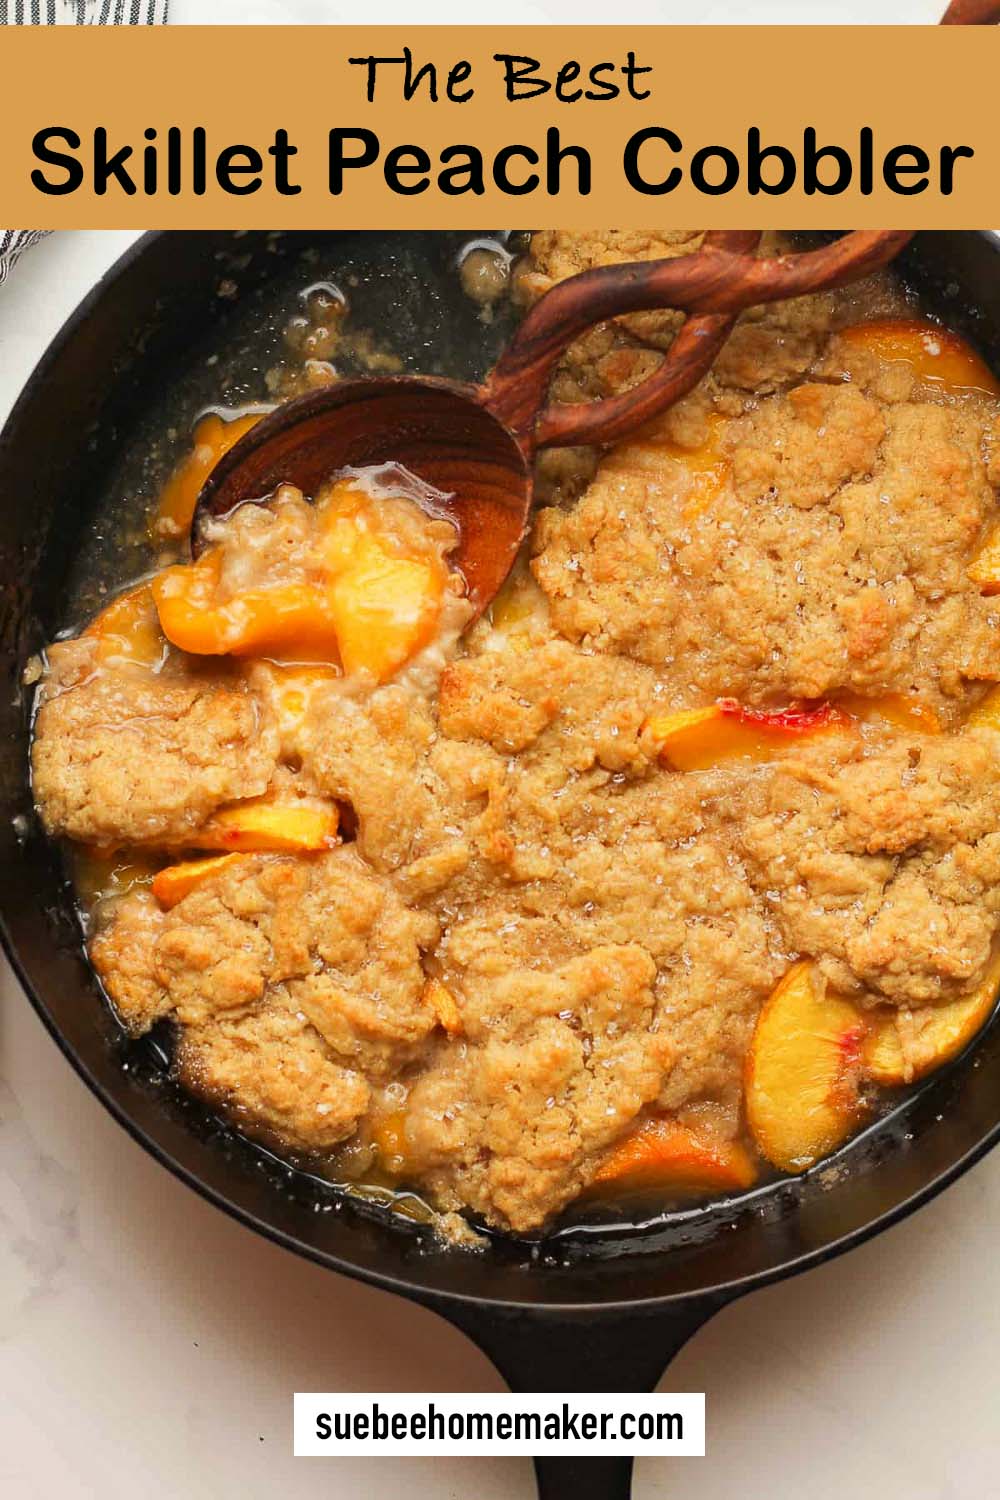 Closeup on the Best Skillet Peach Cobbler with a wooden spoon.